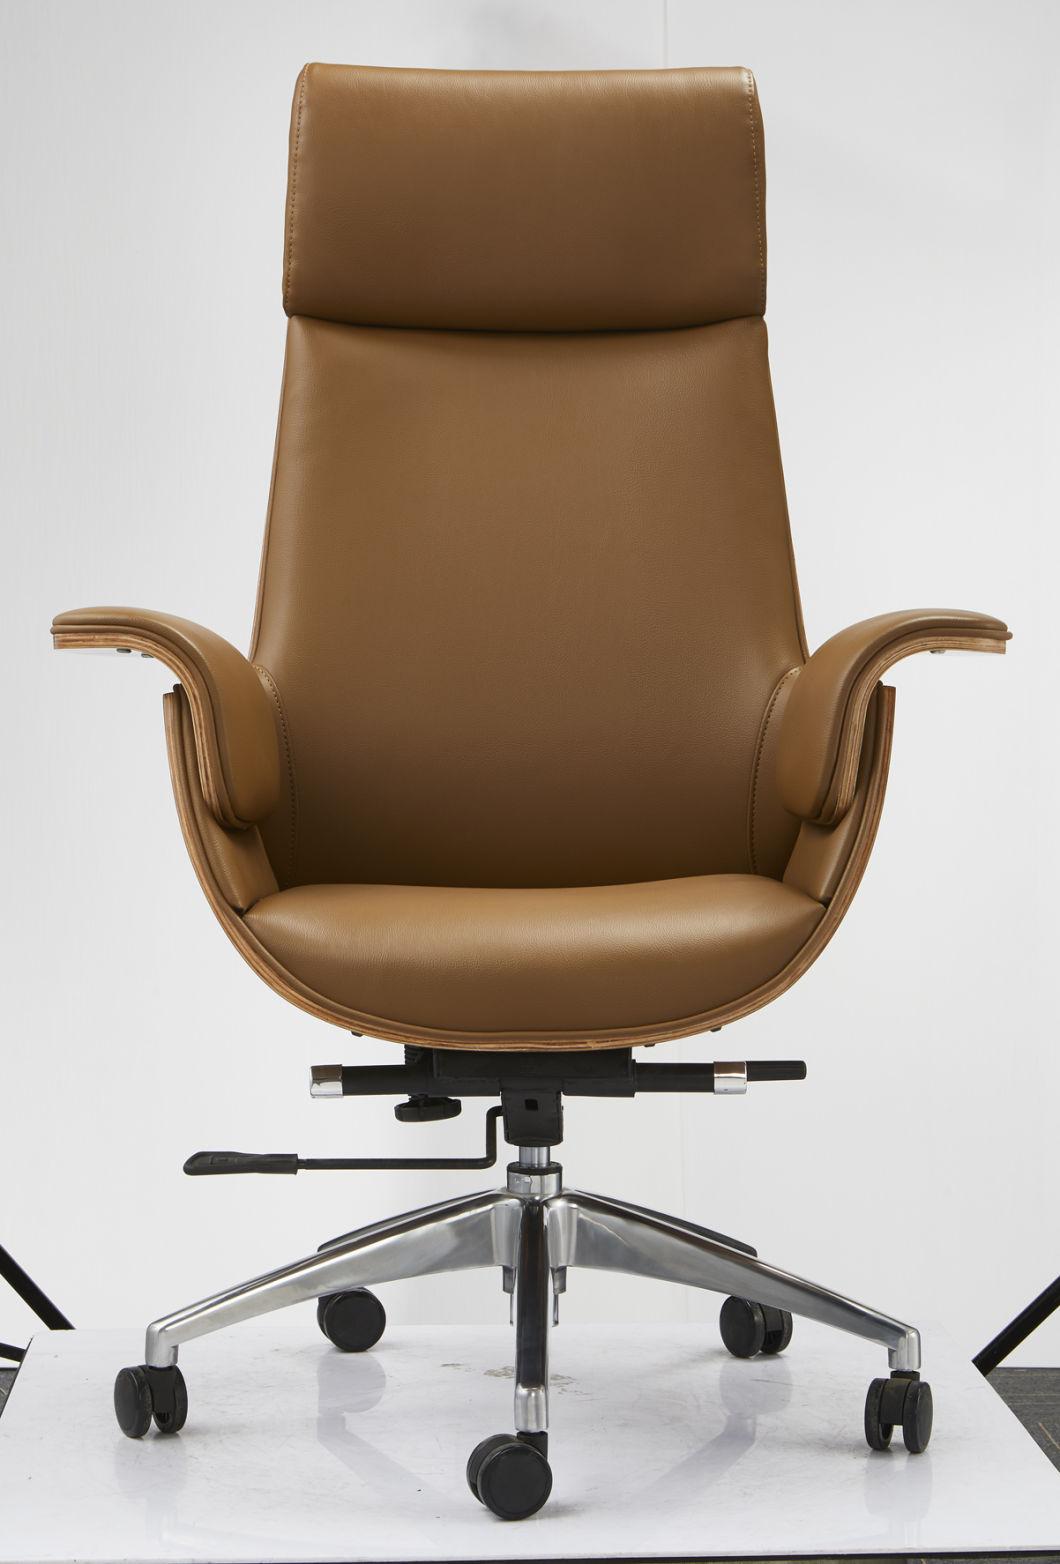 Exquisite Office Chair Modern Ergonomic Adjustable High Swivel Computer Leather Office Chair